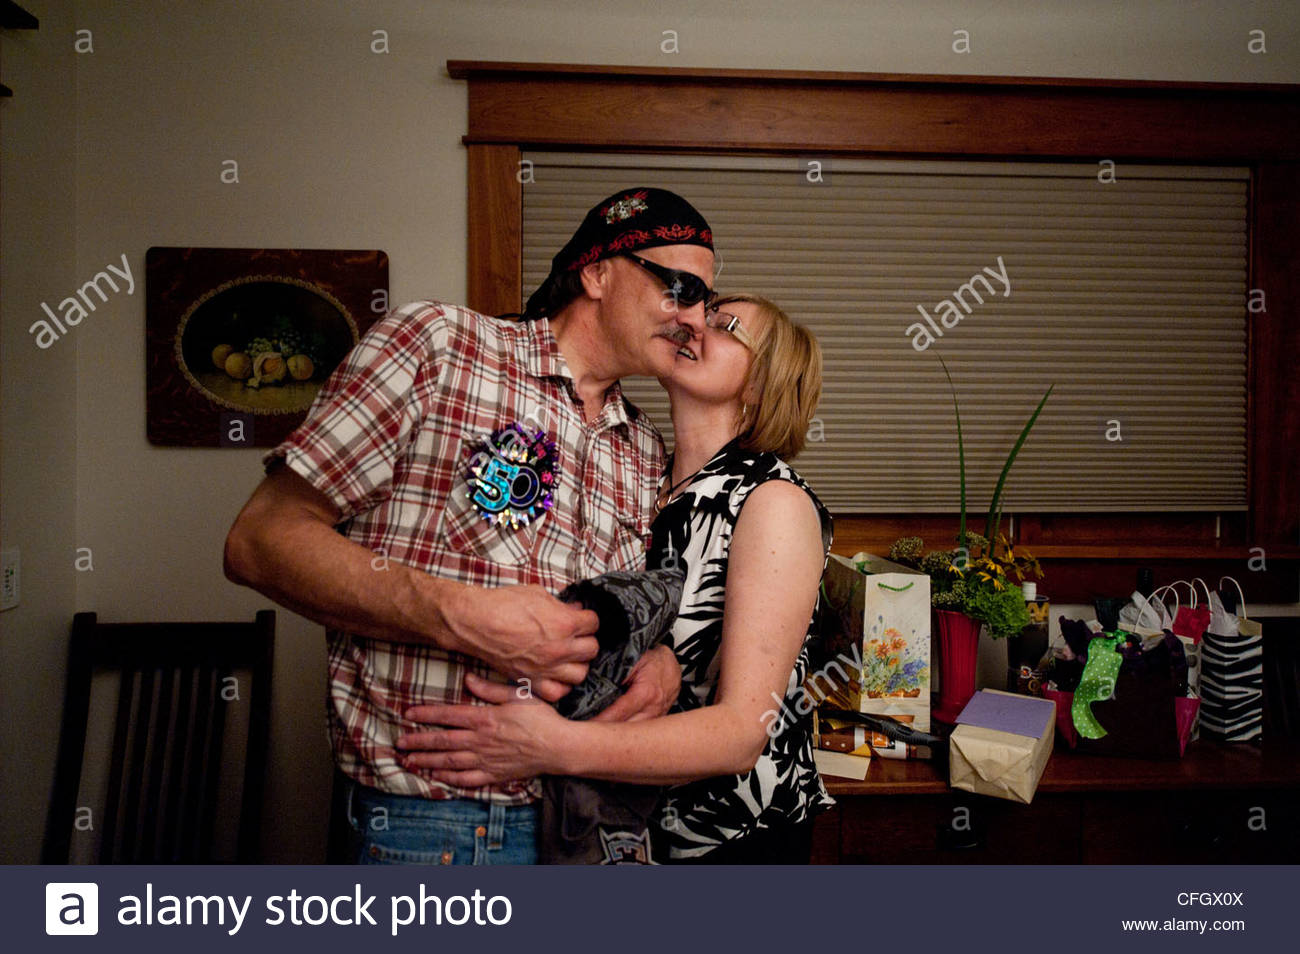 A Husband And Wife Share An Intimate Moment During A Birthday Party